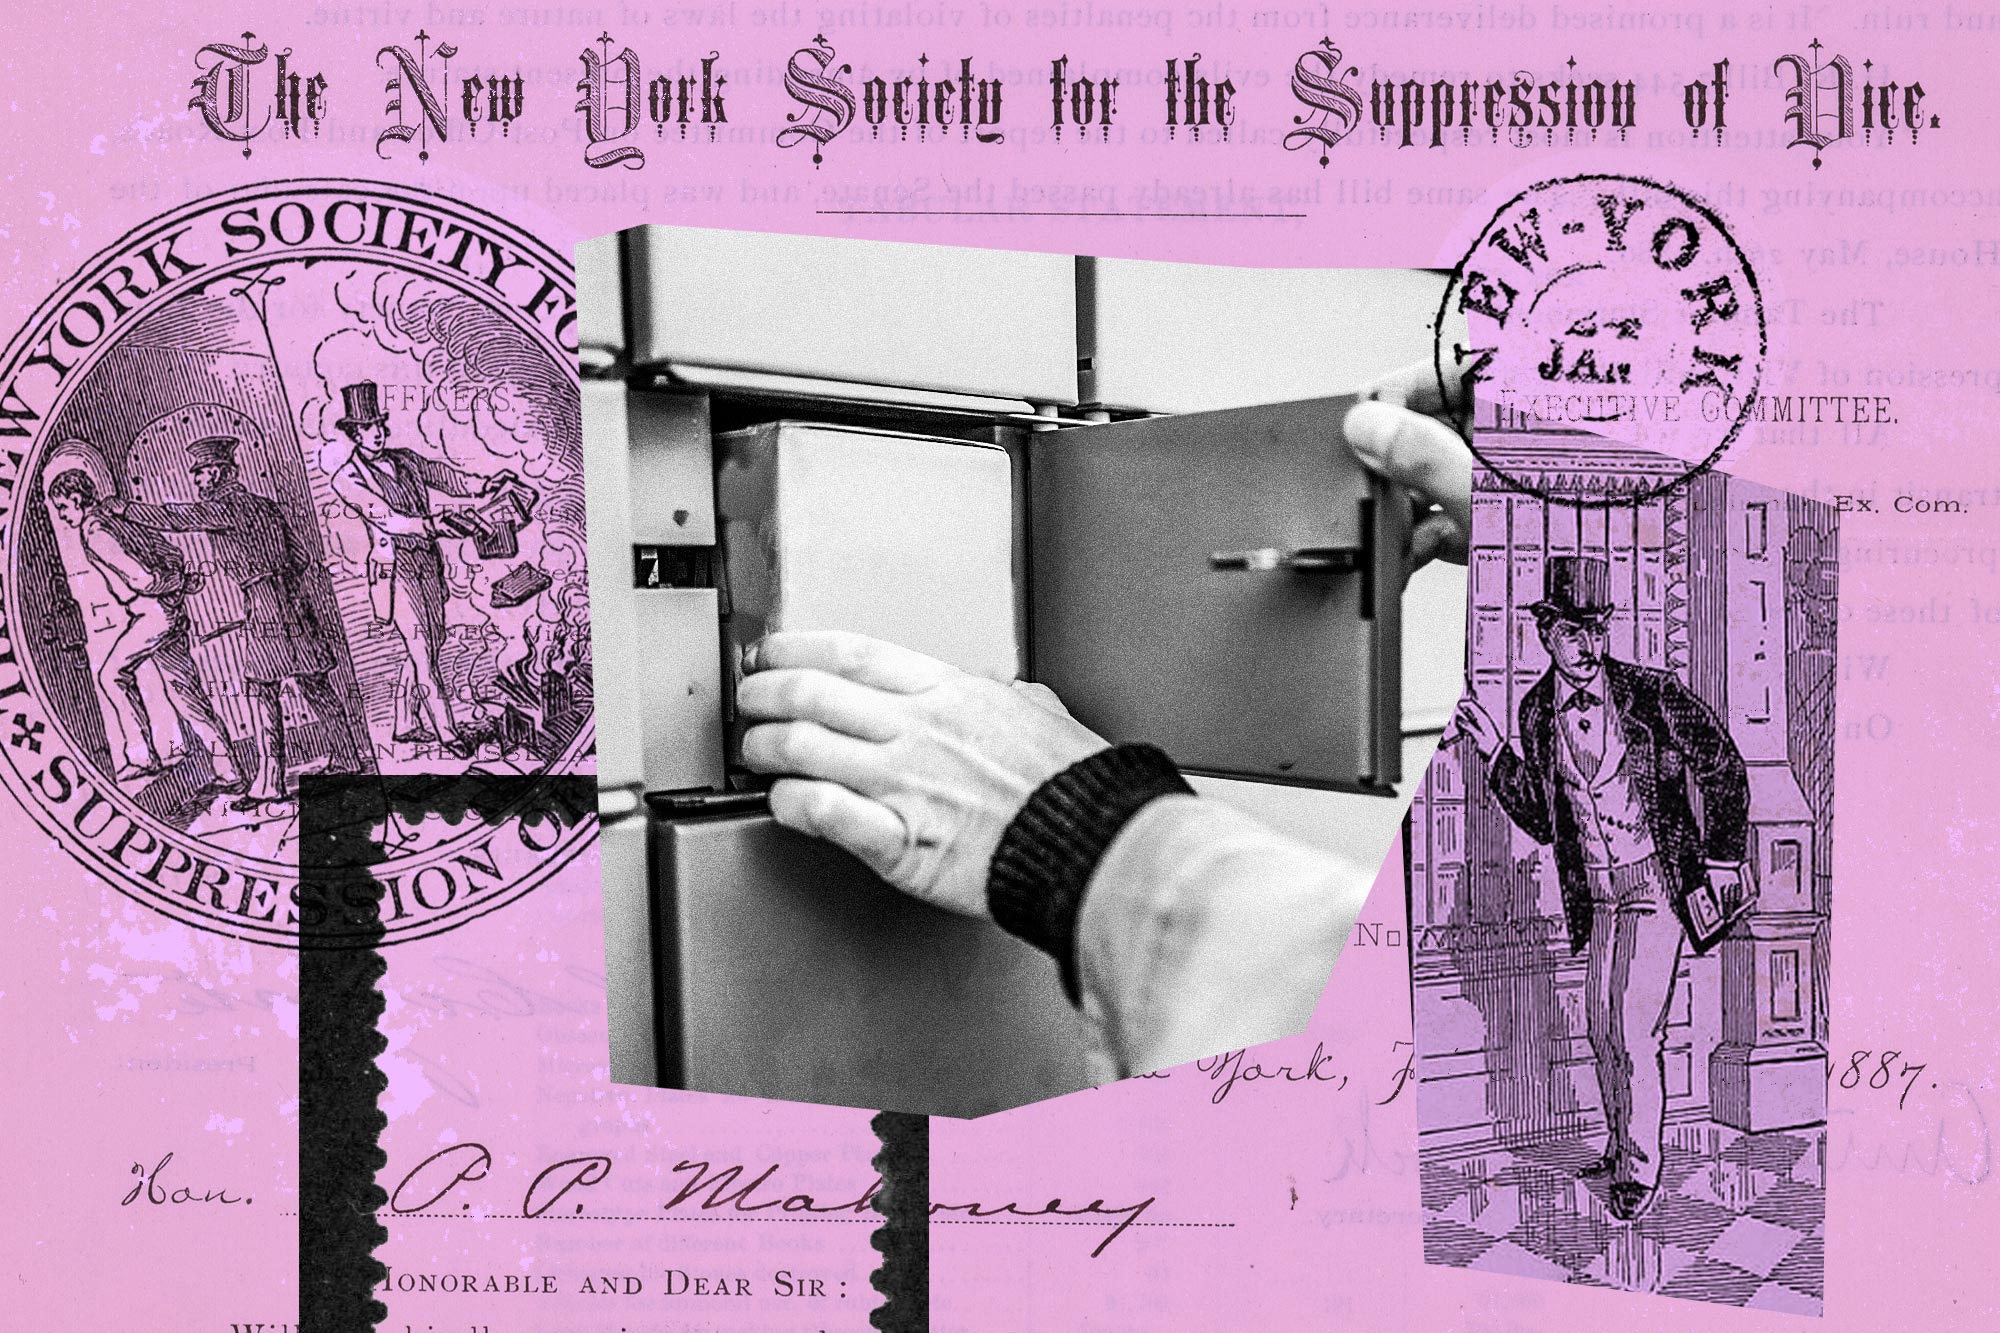 Black-and-white image of a person opening a post office box, while behind it, old-timey stamped letterhead reads, "The New York Society for the Suppression of Vice."